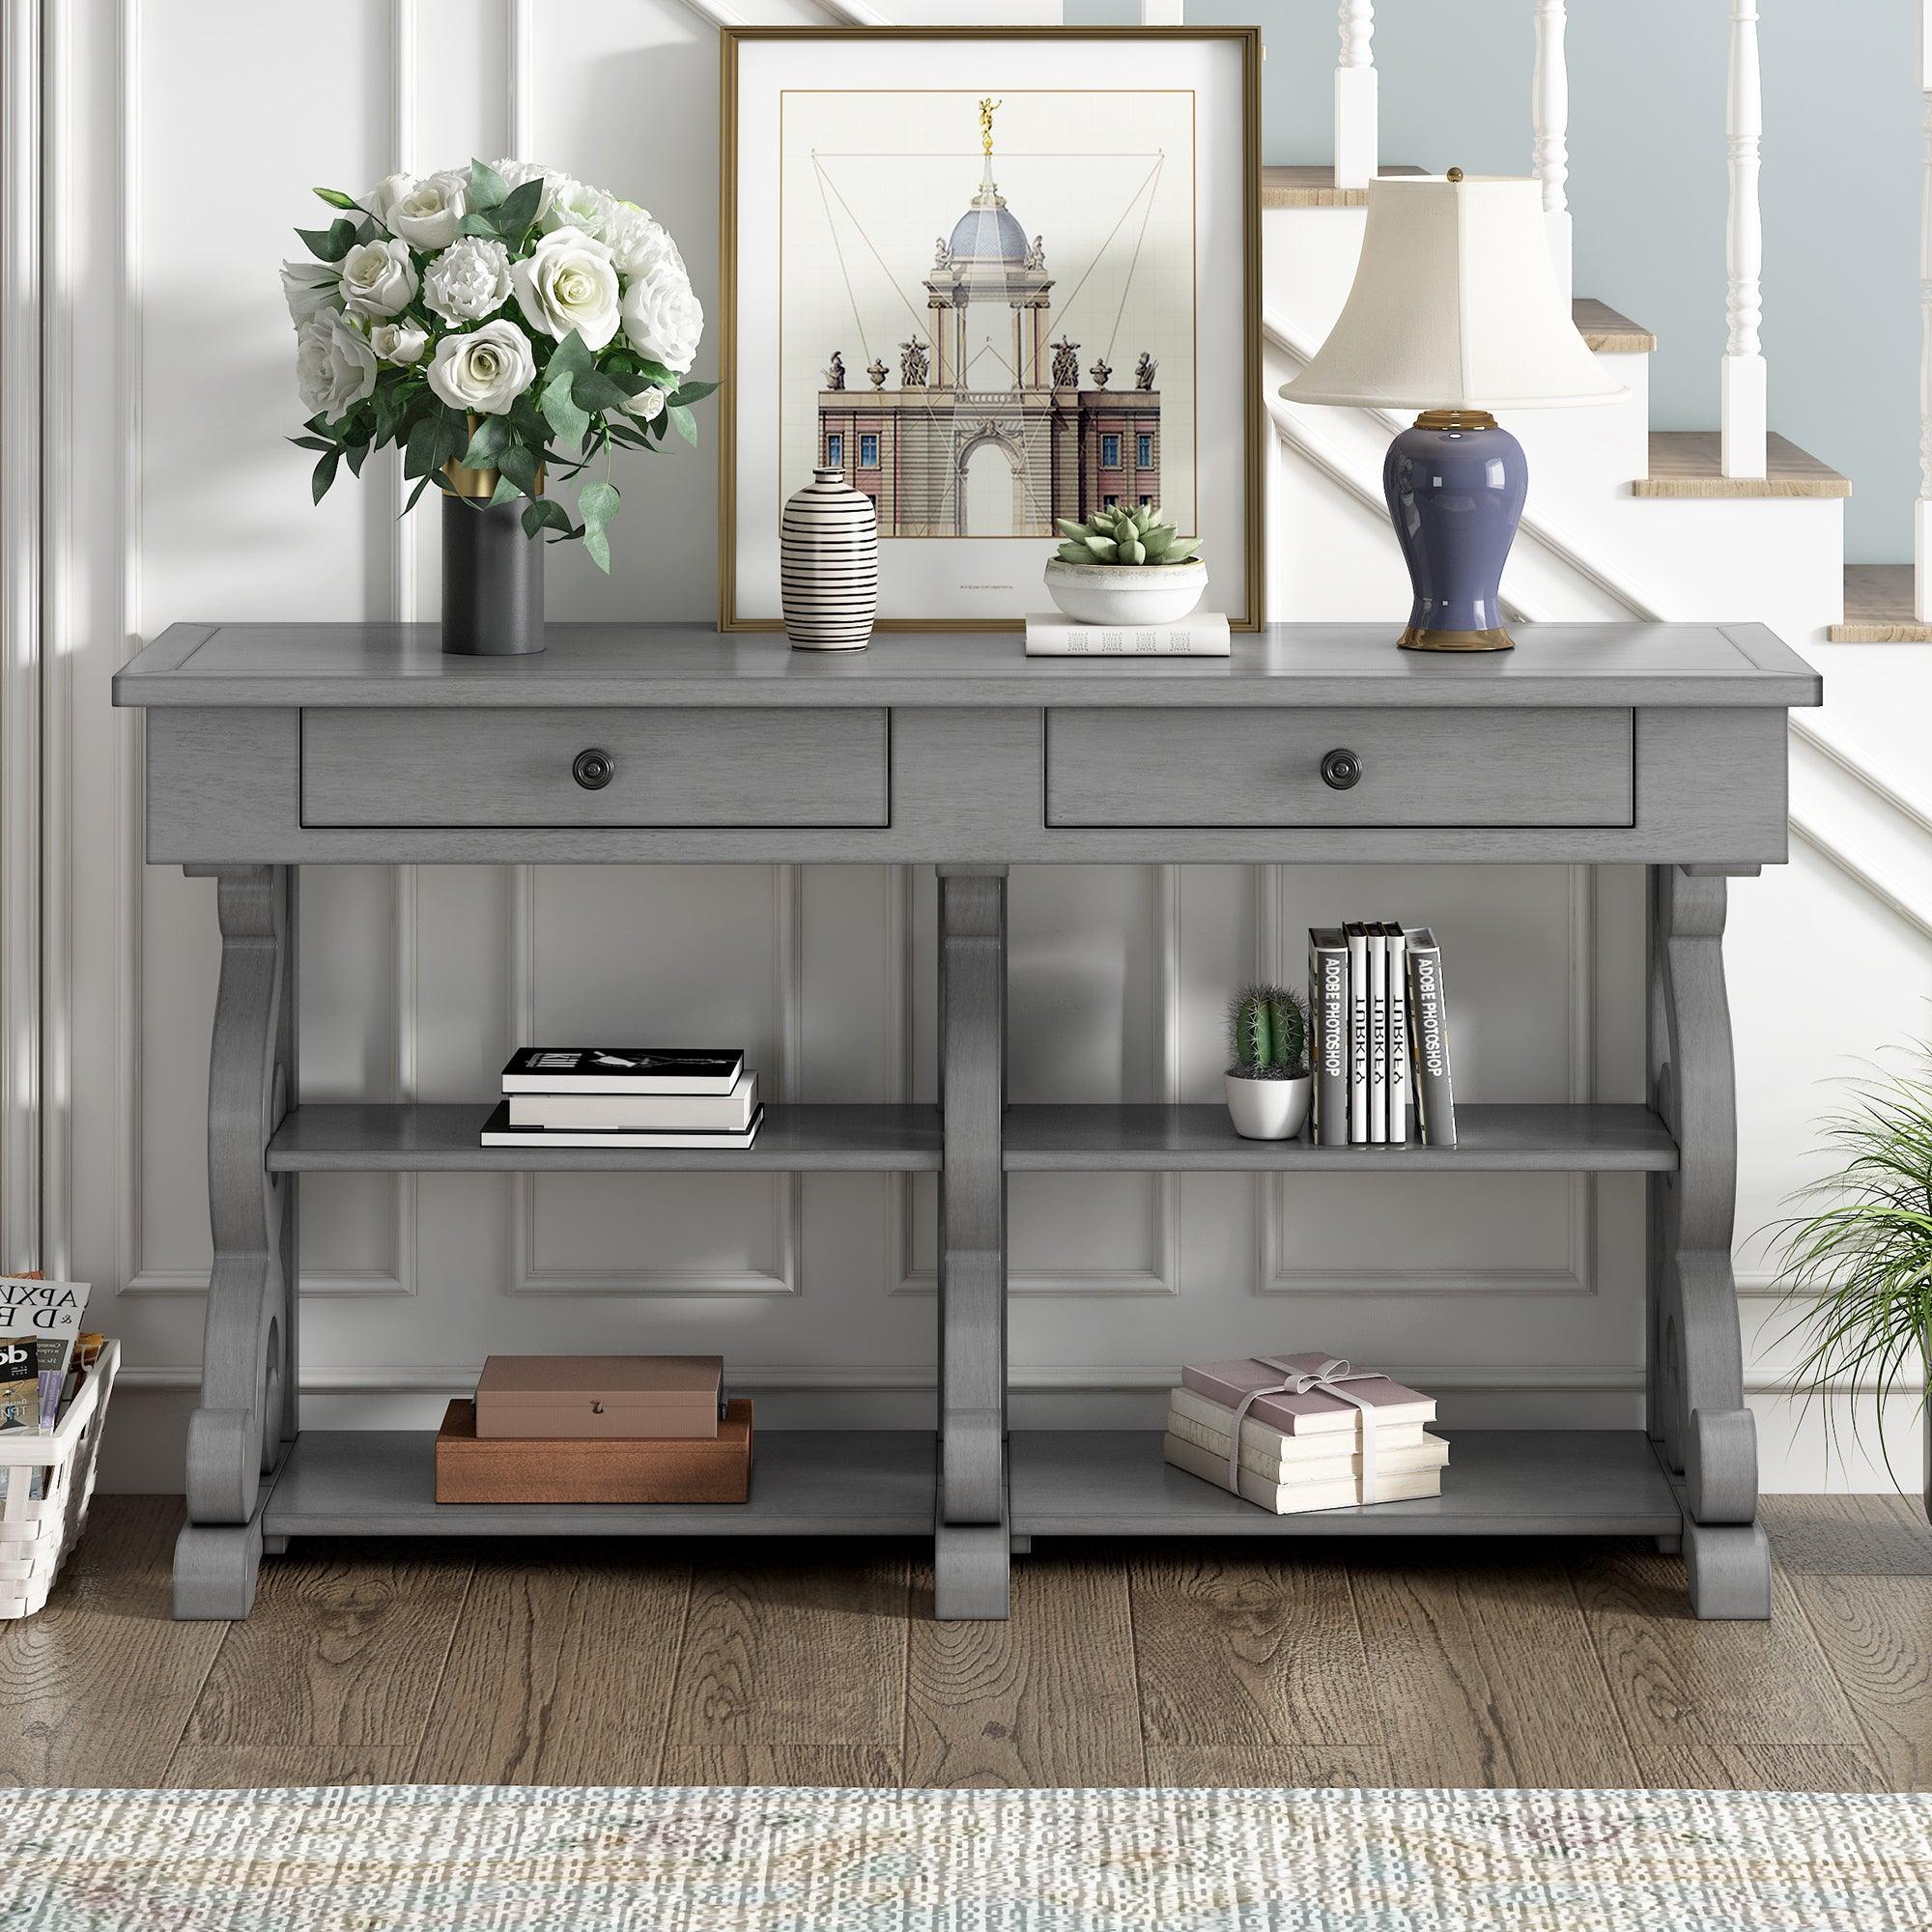 🆓🚛 Retro Console Table/Sideboard With Ample Storage, Open Shelves & Drawers for Entrance, Dinning Room, Living Room (Antique Gray)